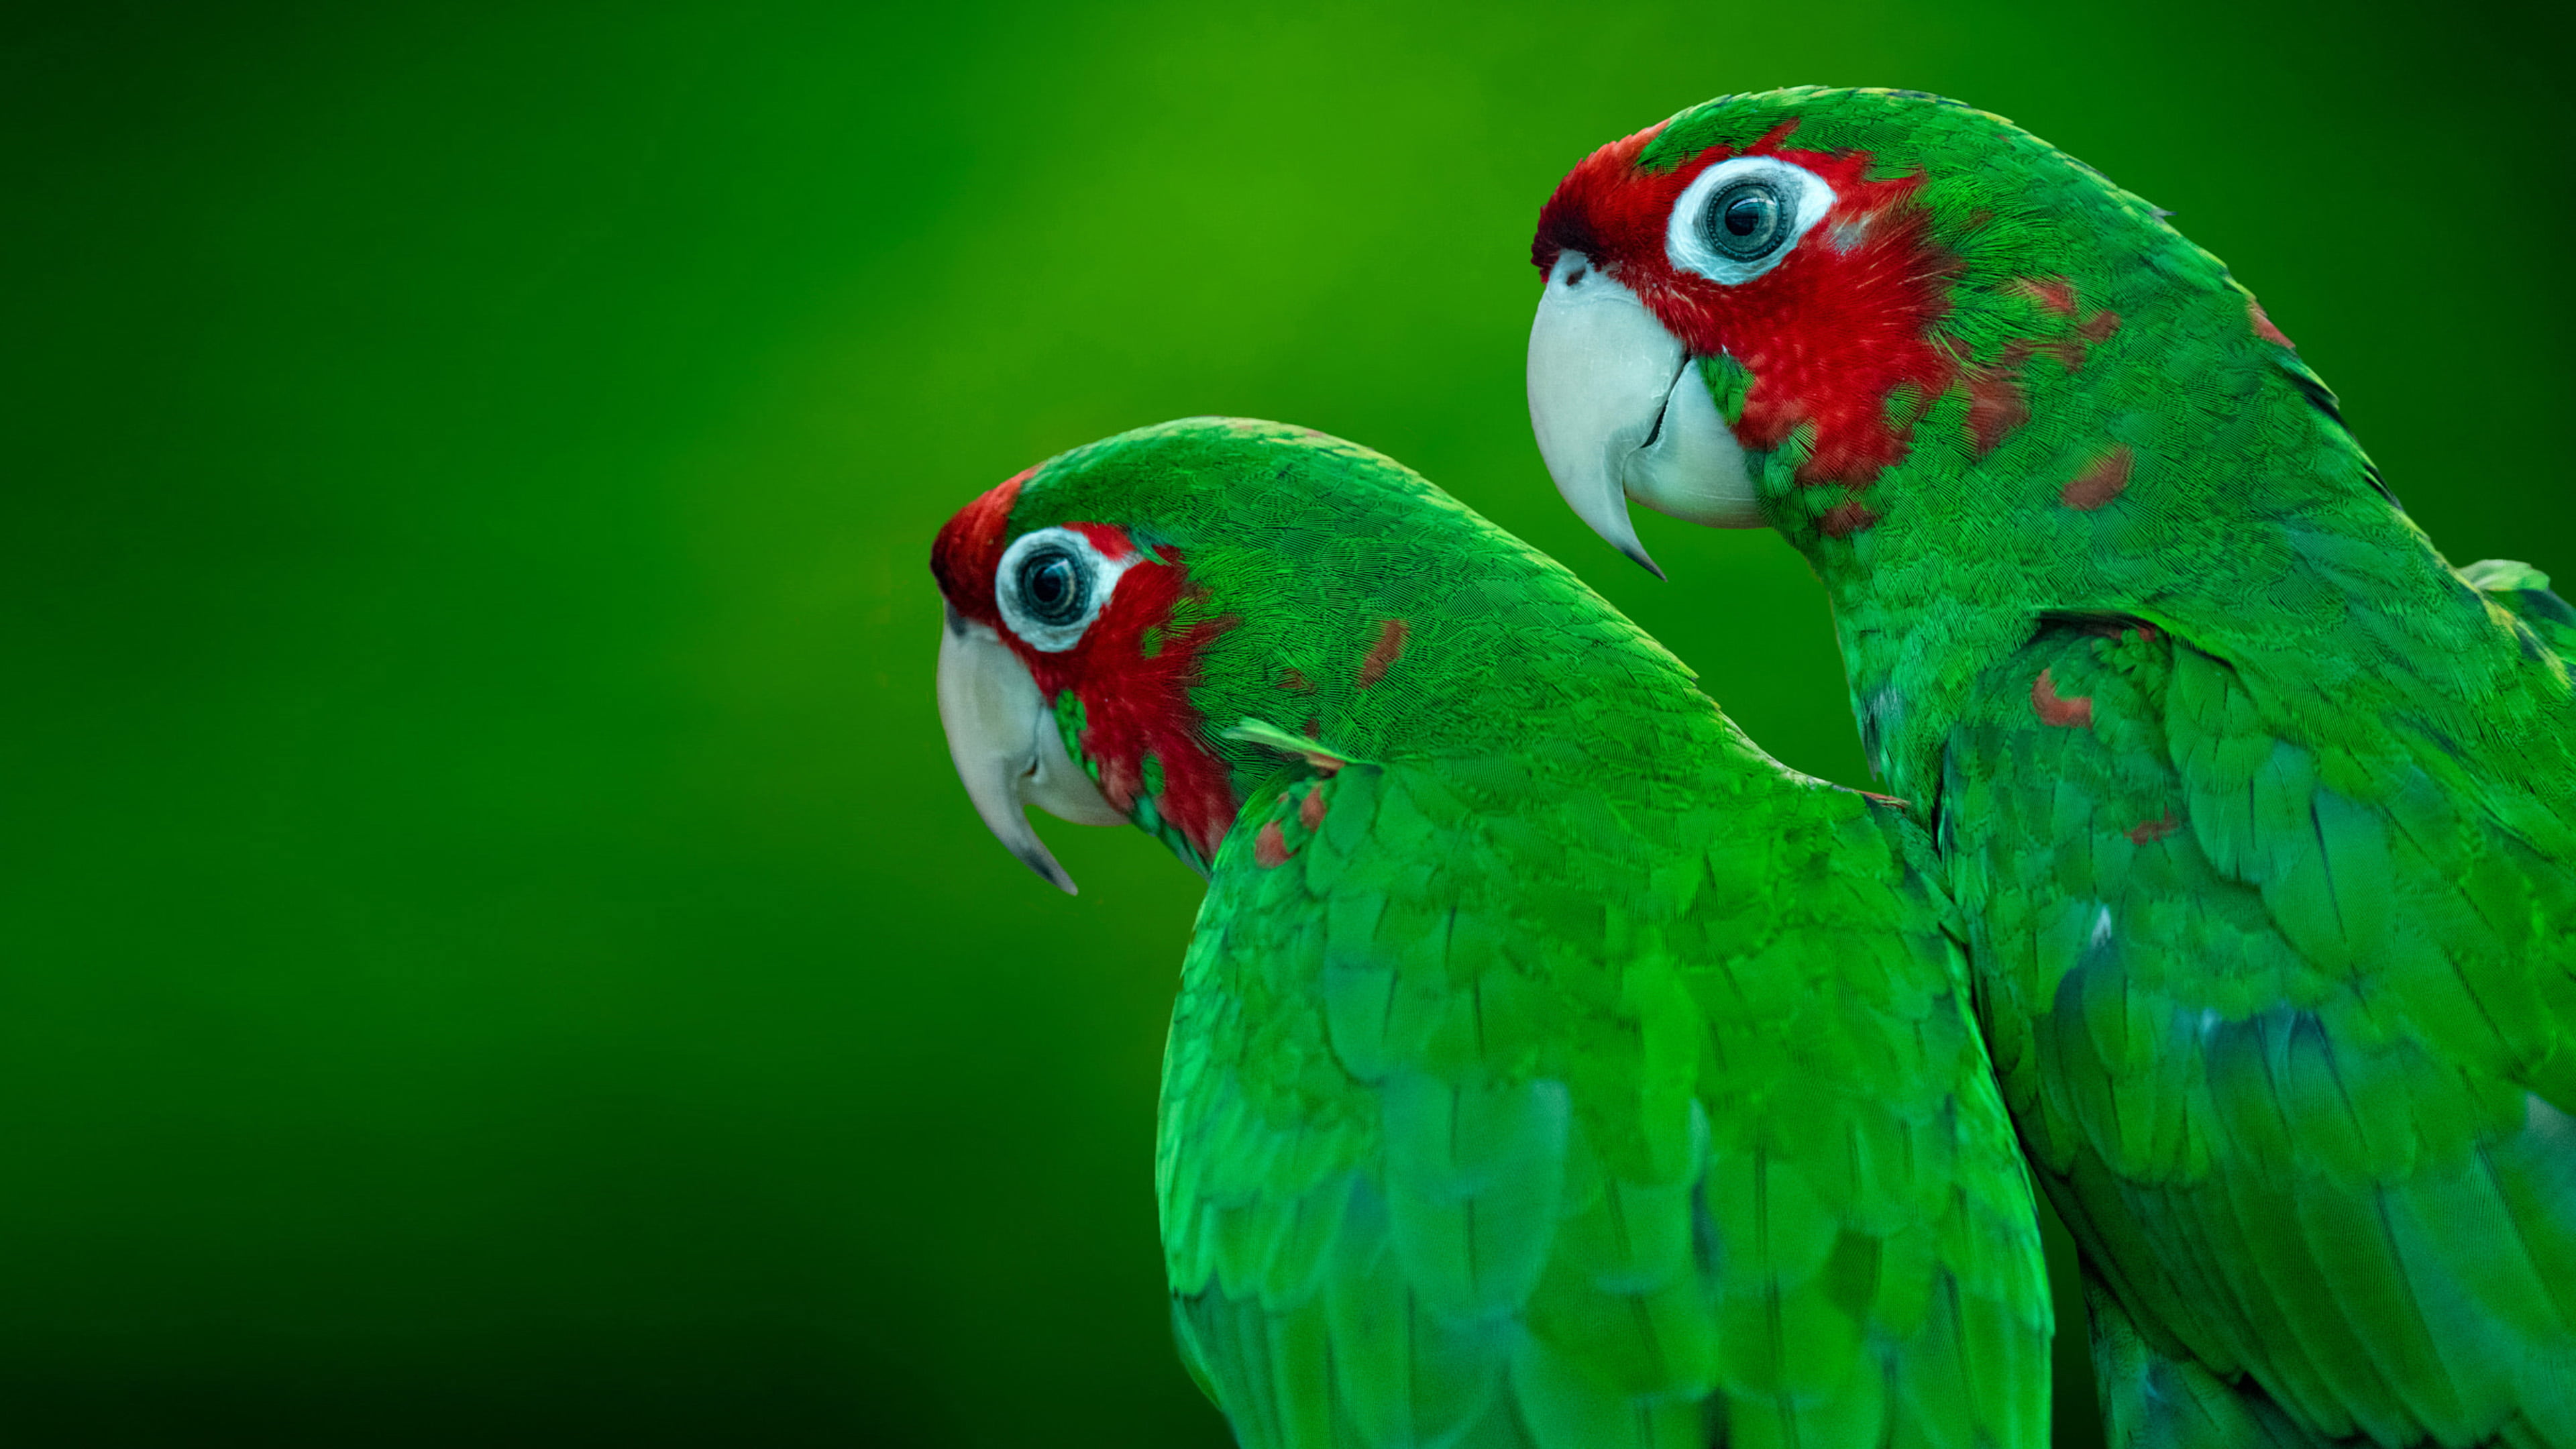 The Red Crowned Amazon Amazona Viridigenalis Known As The Green Cheeked Amazon Red Headed Parrot Hd Wallpaper For Mobile Phones And Tablet 3840×2160